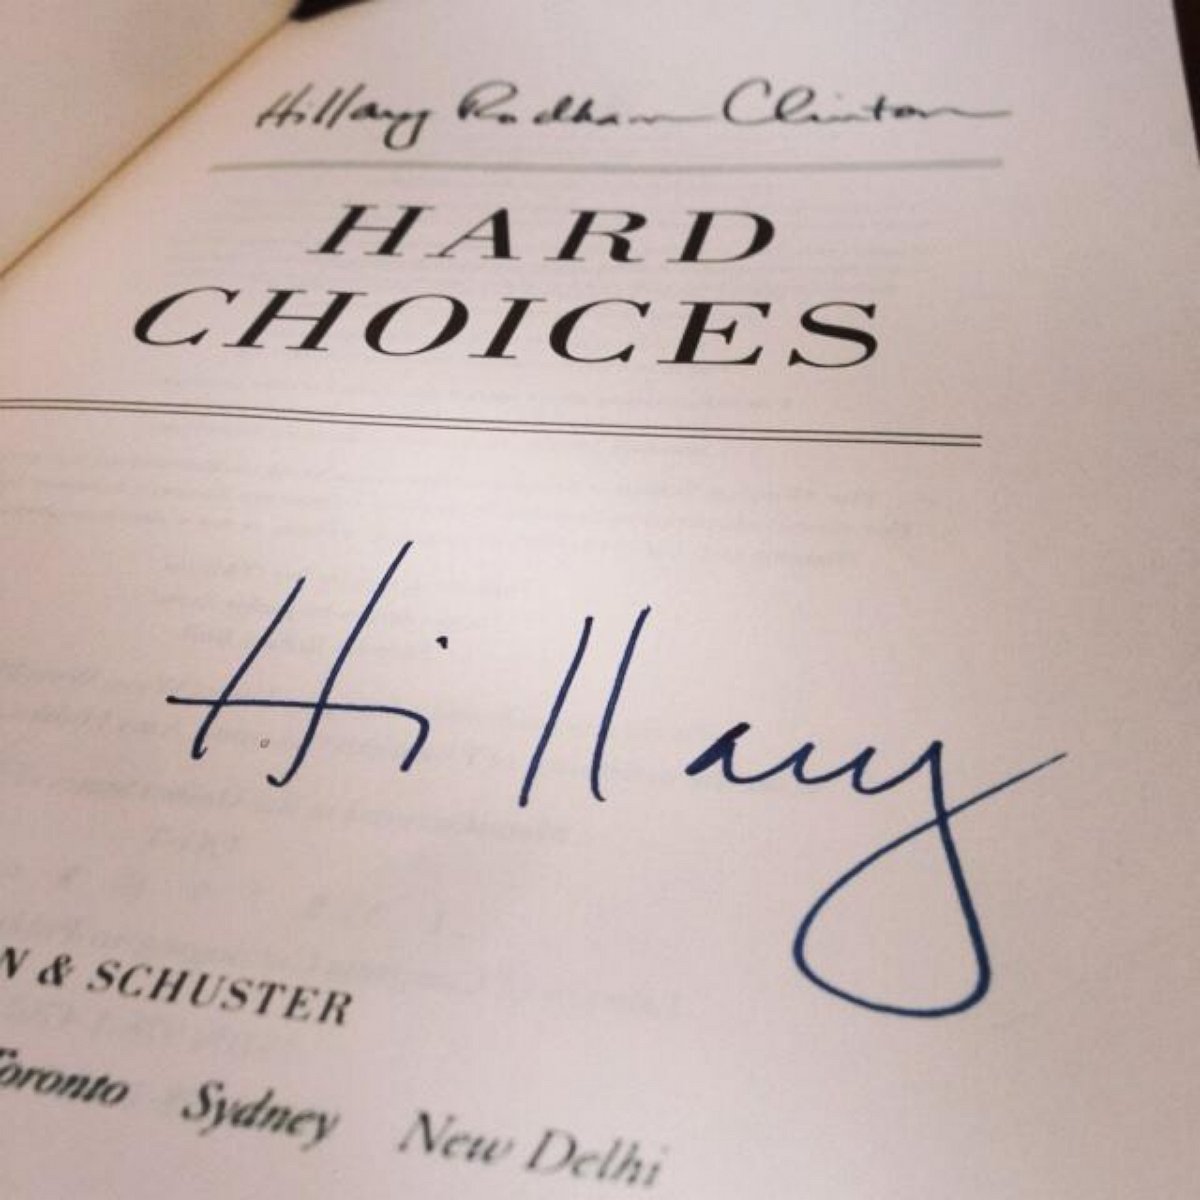 PHOTO: Chris Colfer tweeted this image of his signed copy of Hillary Clinton's "Hard Choices," 